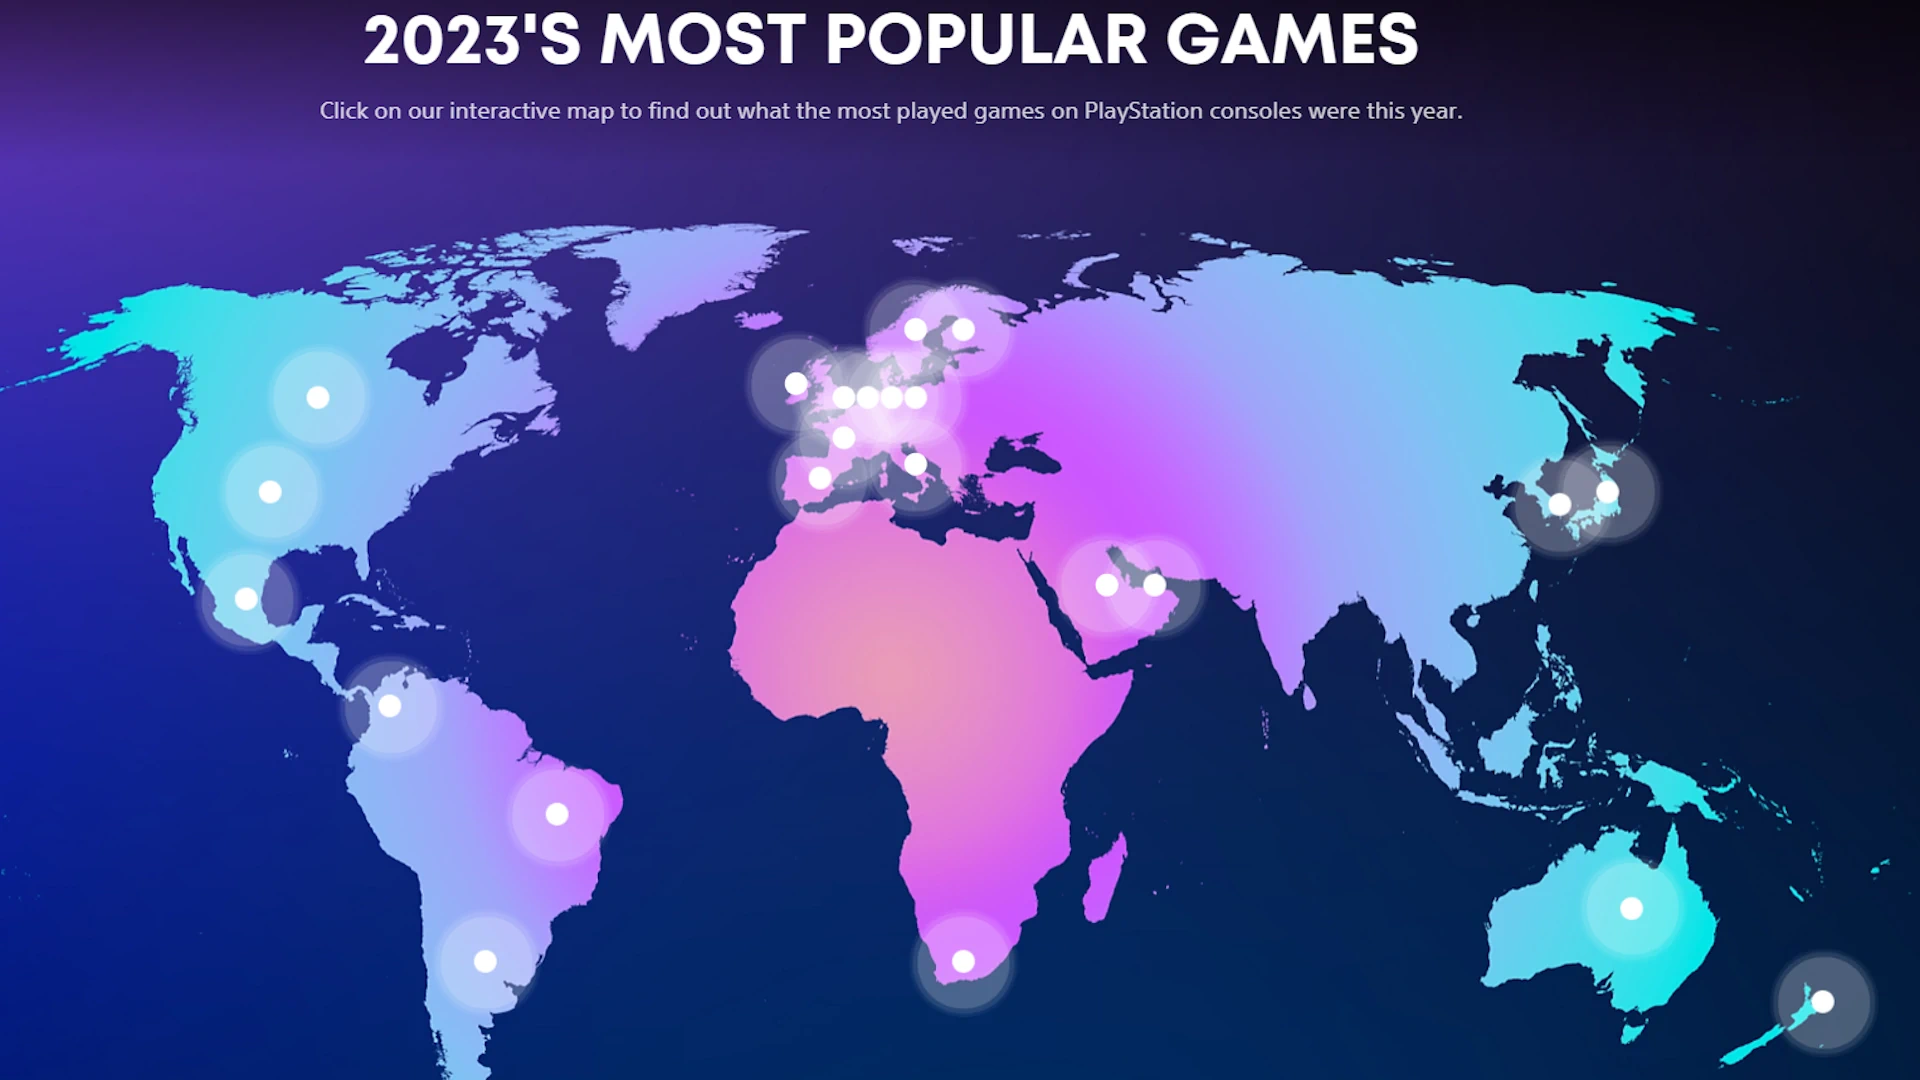 Fortnite and FIFA 23 took the title of most played PlayStation games in 2023.